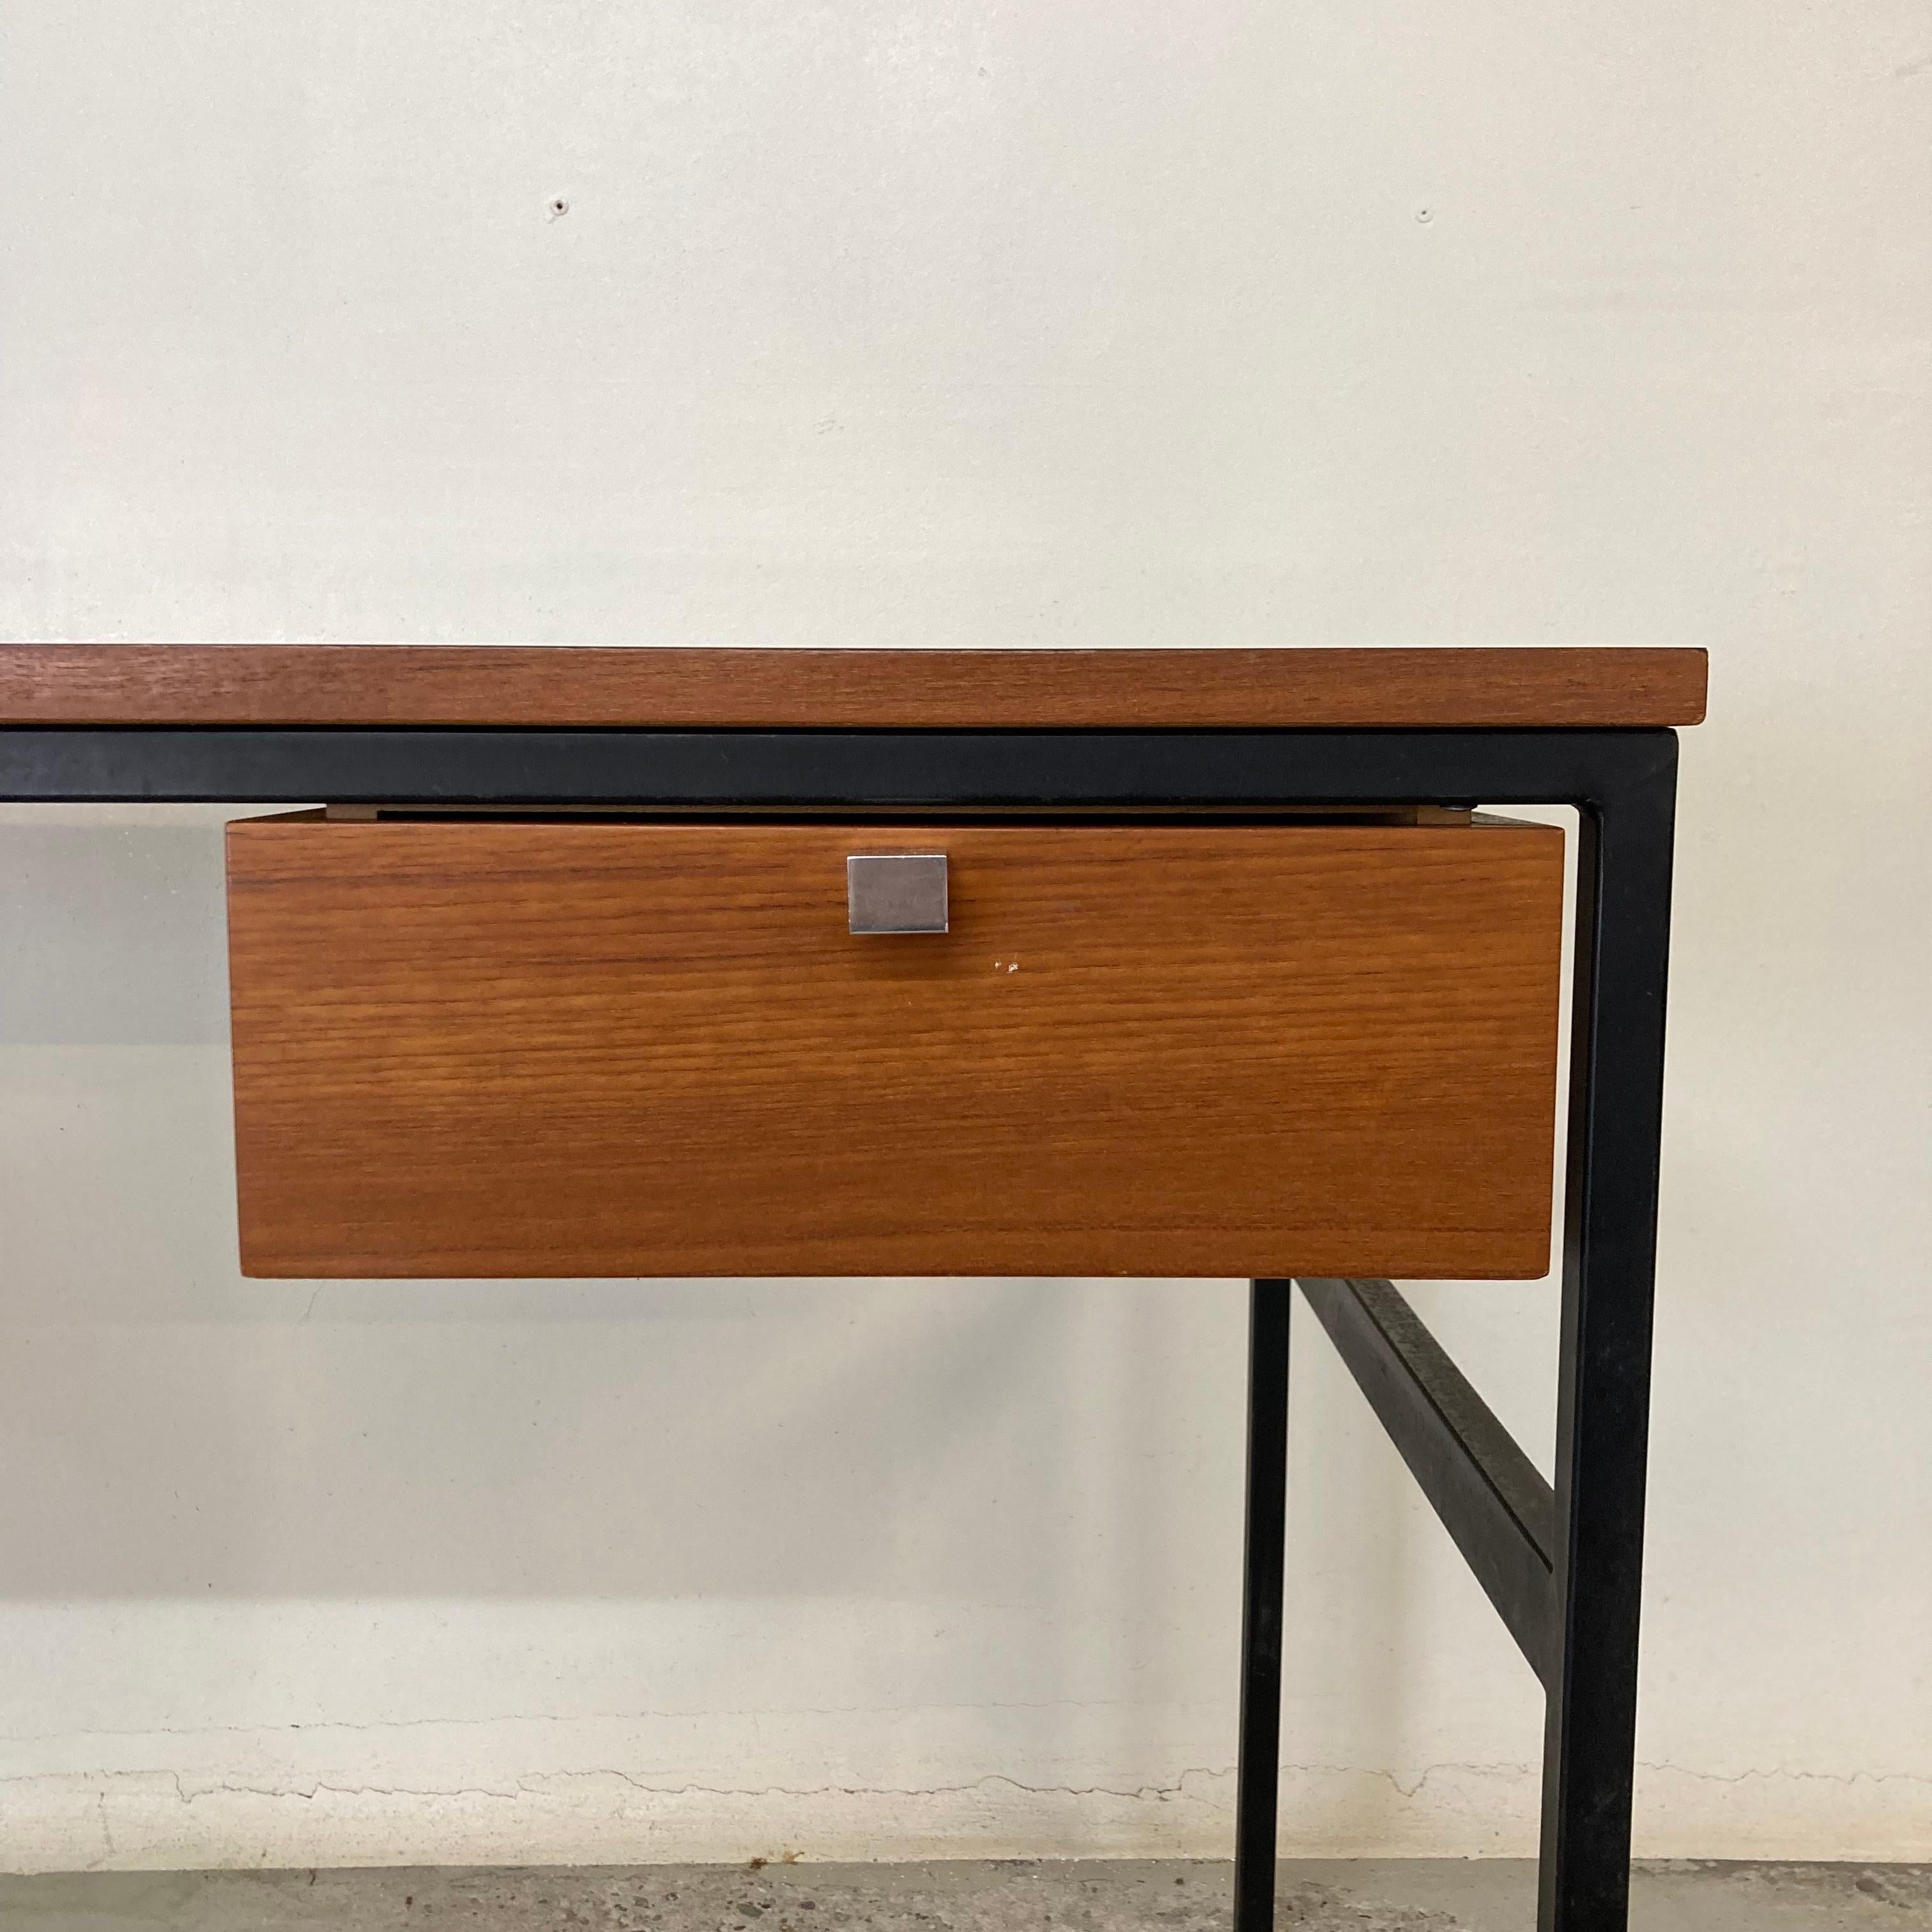 Pierre Paulin & Thonet Desk with Drawer, Metal Teak & Formica, France Circa 1955 For Sale 2